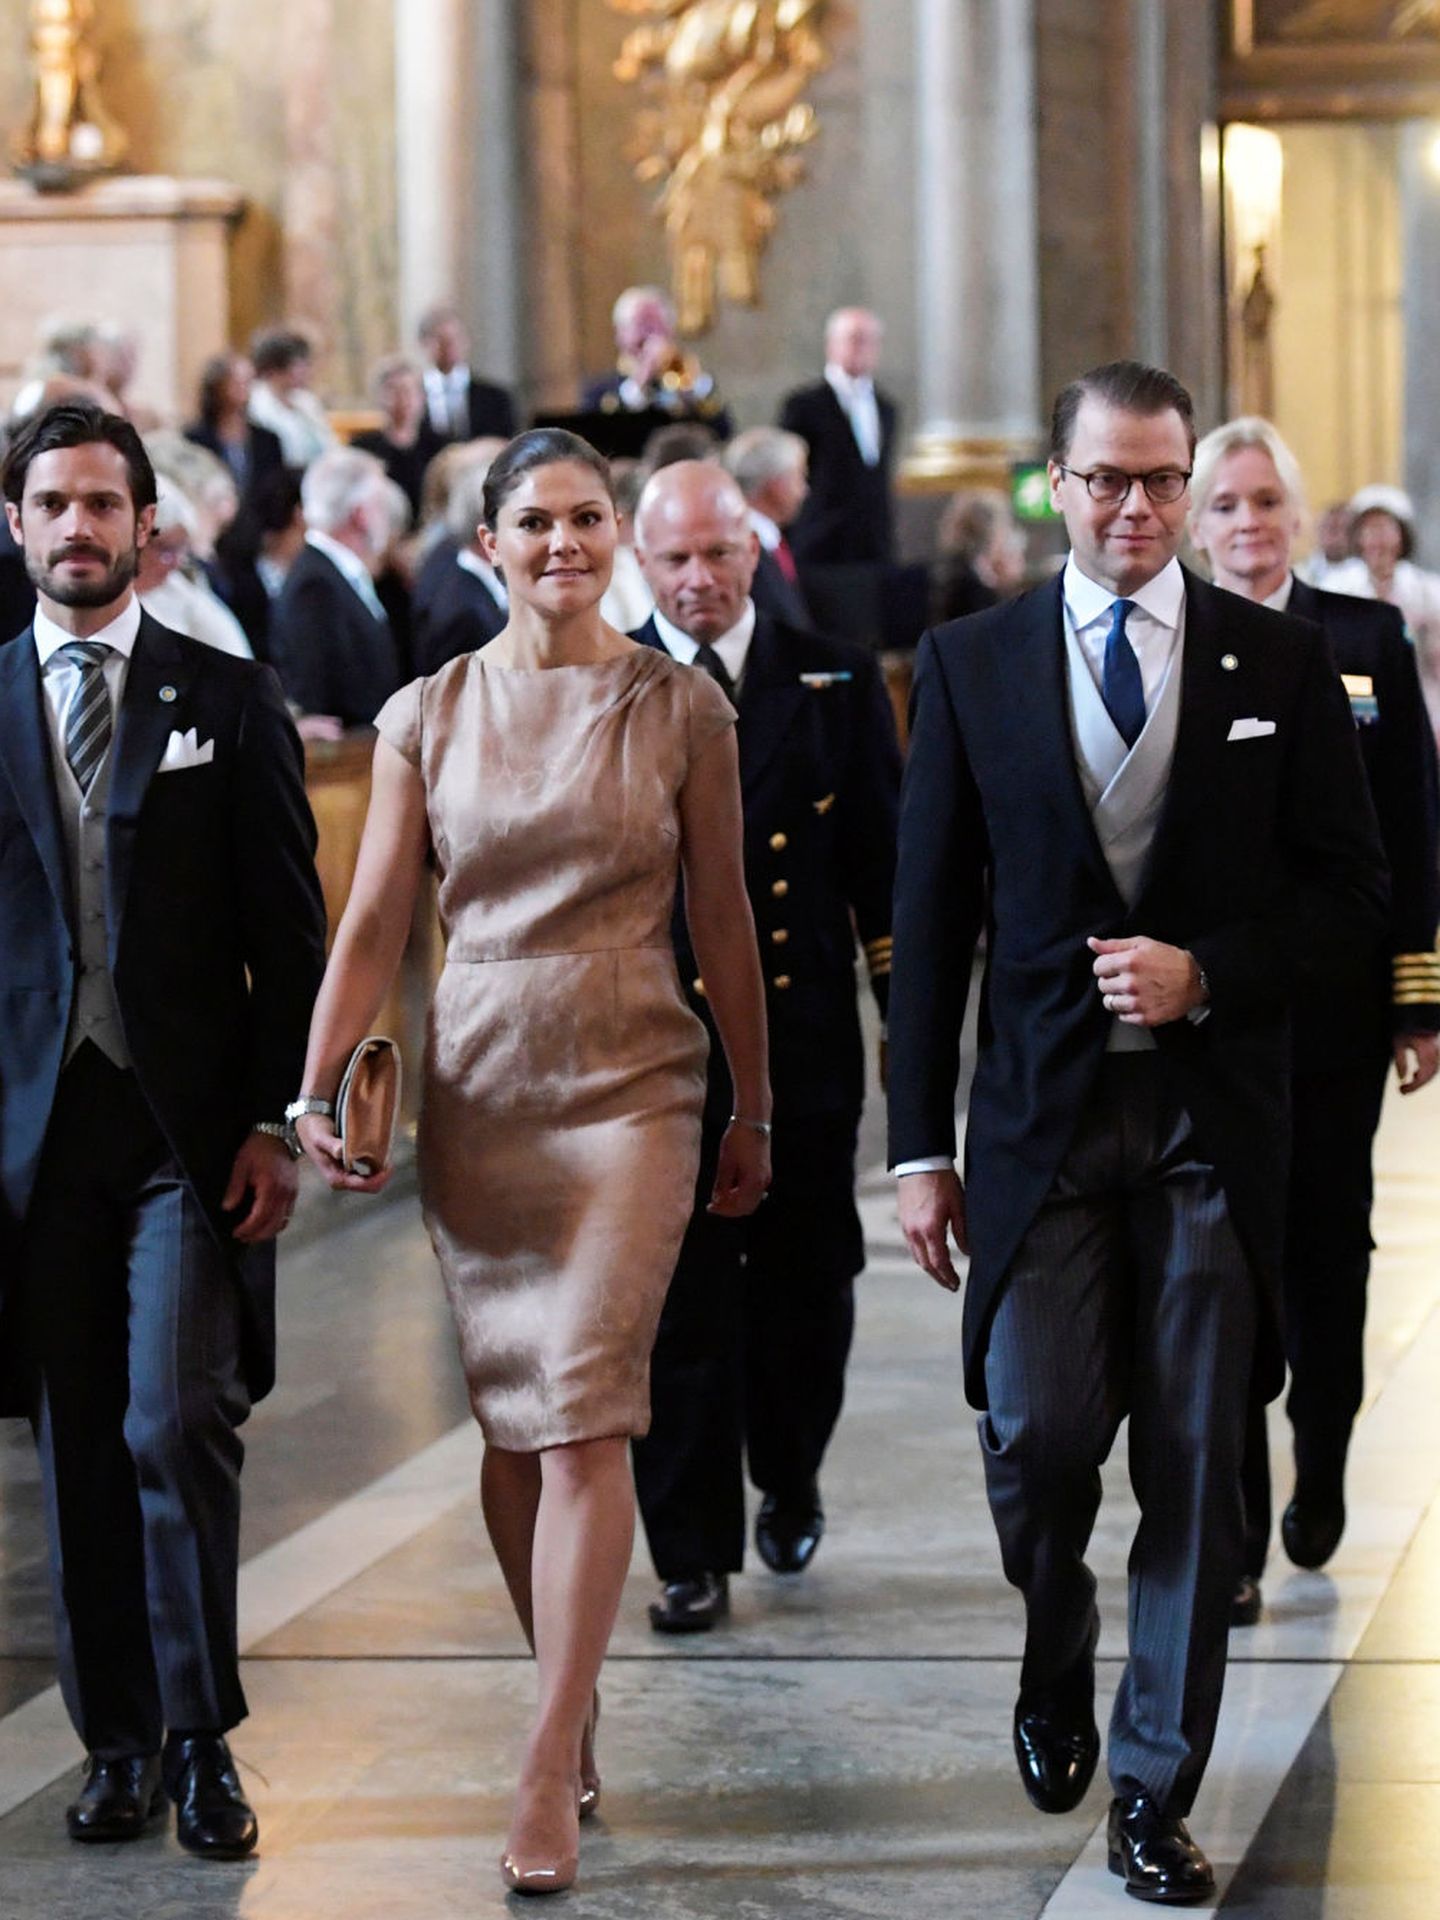 Prince Carl Philip, Crown Princess Victoria and Prince Daniel arrive for the Te Deum ceremony the Te Deum ceremony for the new born Prince Gabriel, son of Prince Carl Philip and Princess Sofia at the Royal Chapel in Stockholm, Sweden September 4, 2017 TT News Agency Anders Wiklund via REUTERS  ATTENTION EDITORS - THIS IMAGE WAS PROVIDED BY A THIRD PARTY. SWEDEN OUT. NO COMMERCIAL OR EDITORIAL SALES IN SWEDEN